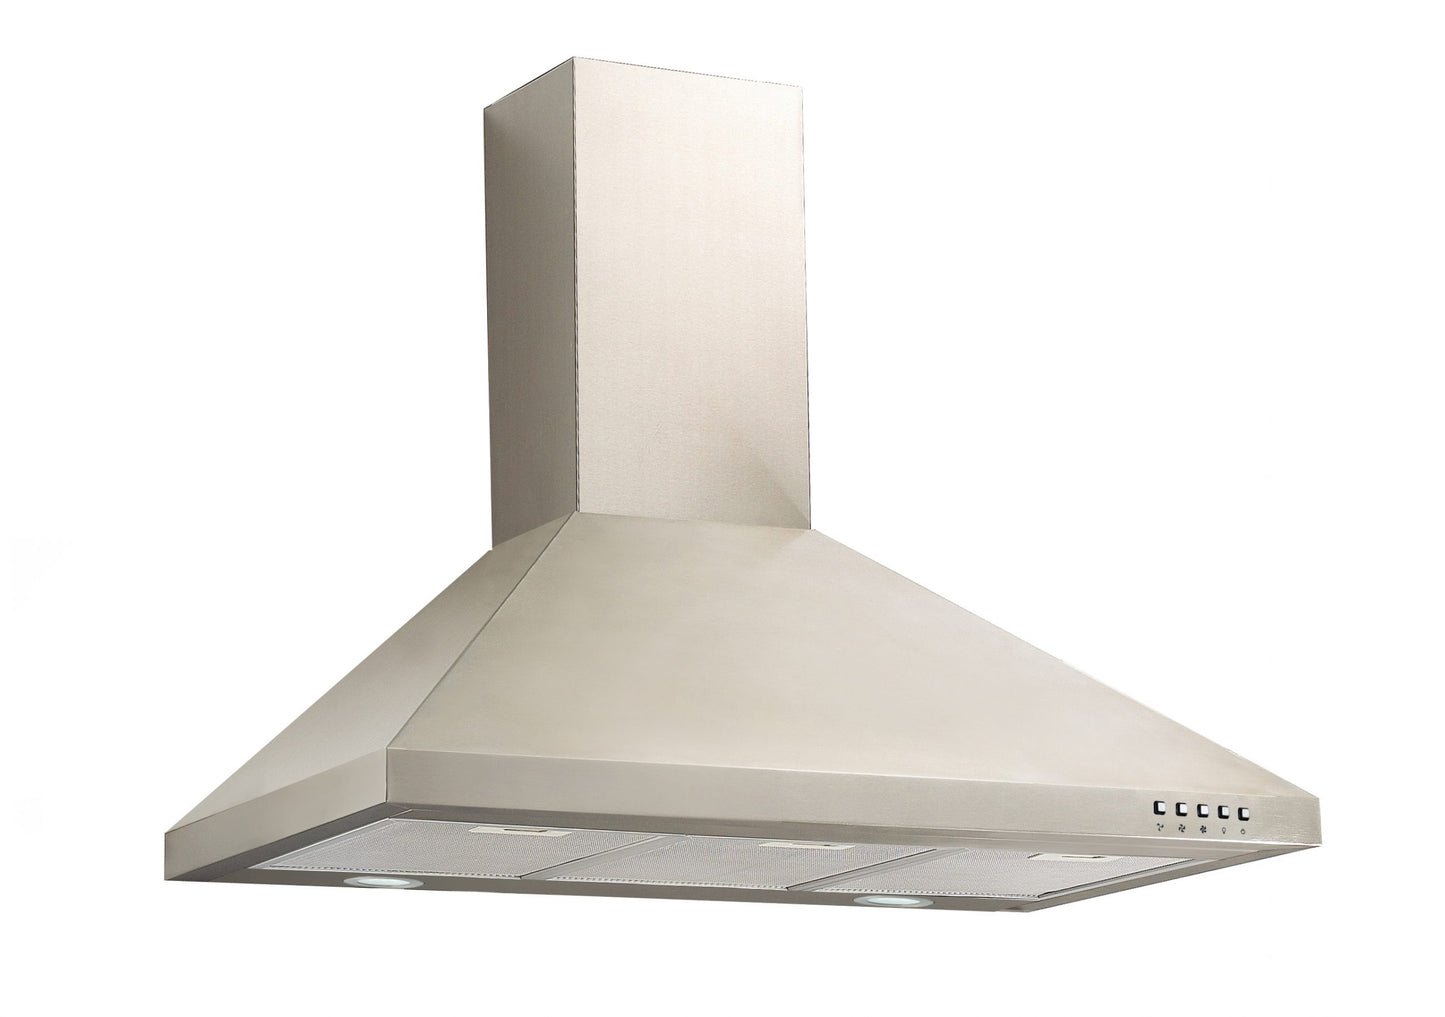 Falco 90cm Pyramid Type S/Steel Chimney EXTRACTOR - FAL-90-52S